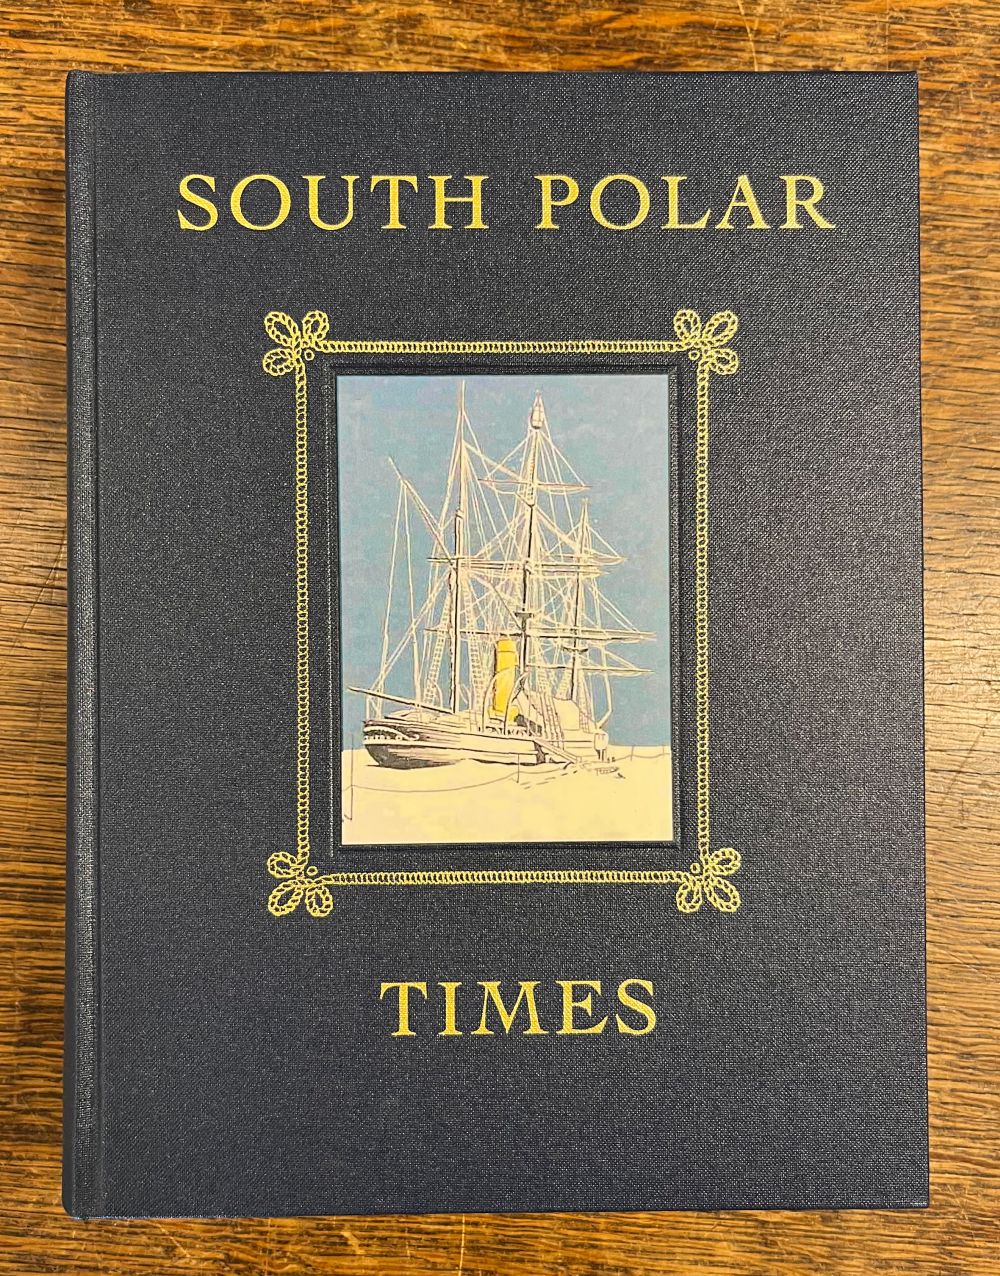 South Polar Times. The South Polar Times, 3 volumes, Centenary Edition, 2002 - Image 2 of 13